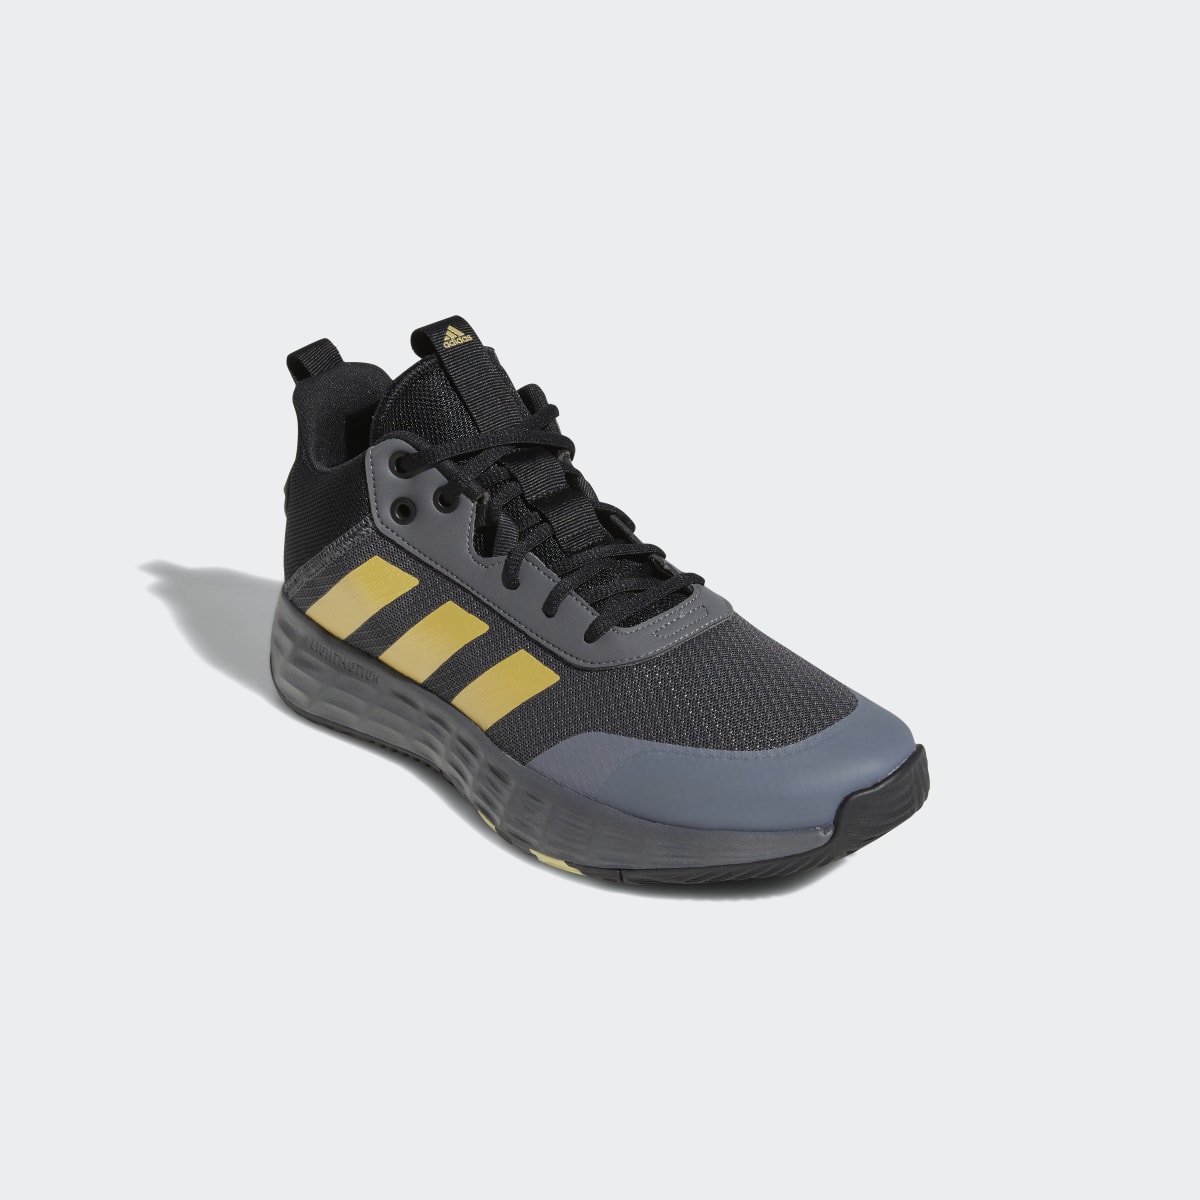 Adidas Ownthegame Basketball Shoes. 5